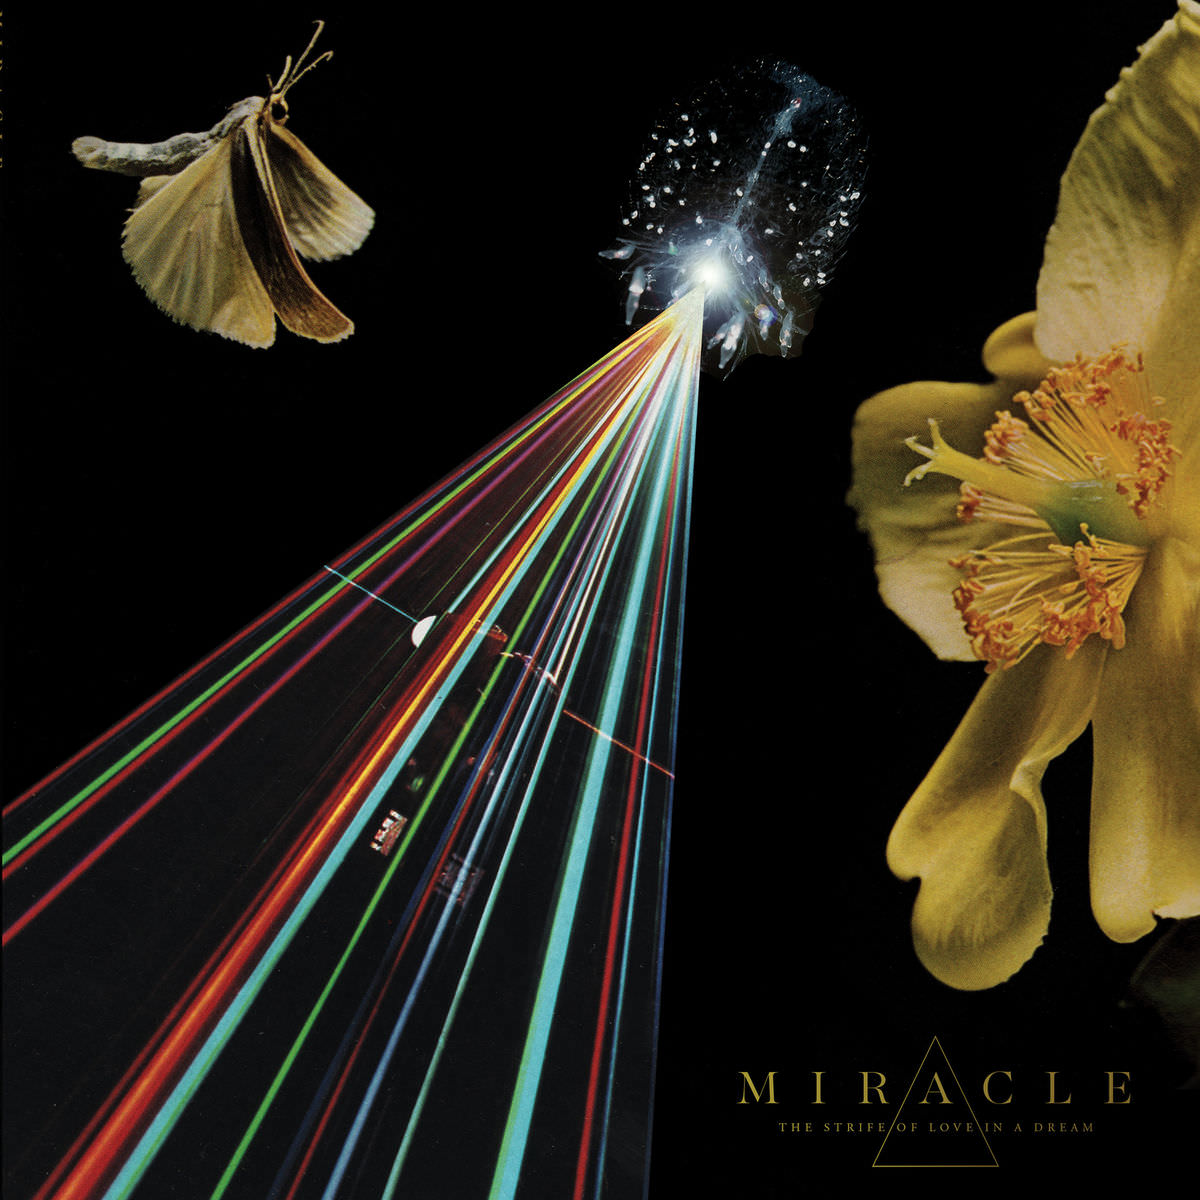 Miracle – The Strife of Love in a Dream (2018) [FLAC 24bit/96kHz]